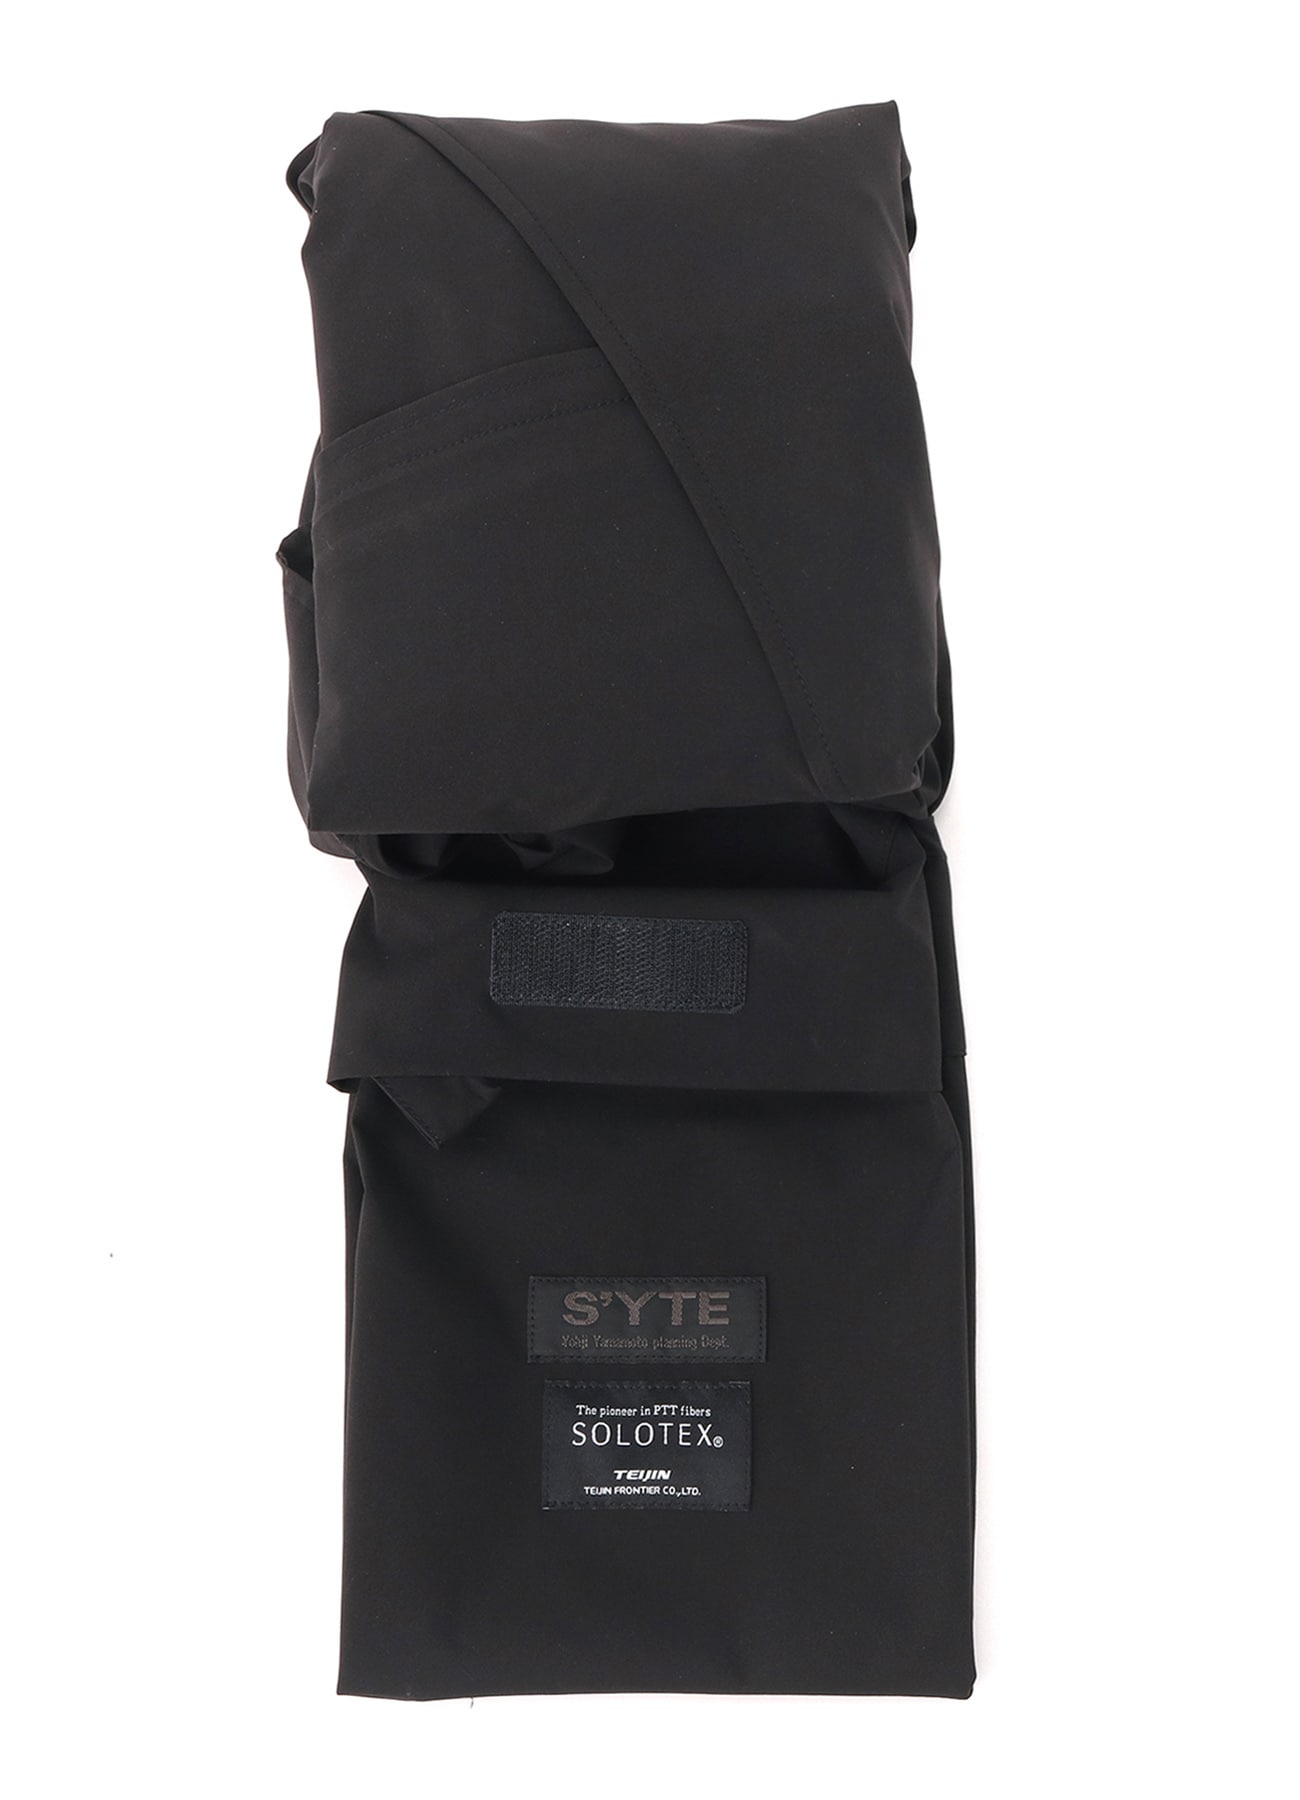 SOLOTEX POCKETABLE 3BS TAILORED SHIRT JACKET(M Black): S'YTE｜THE